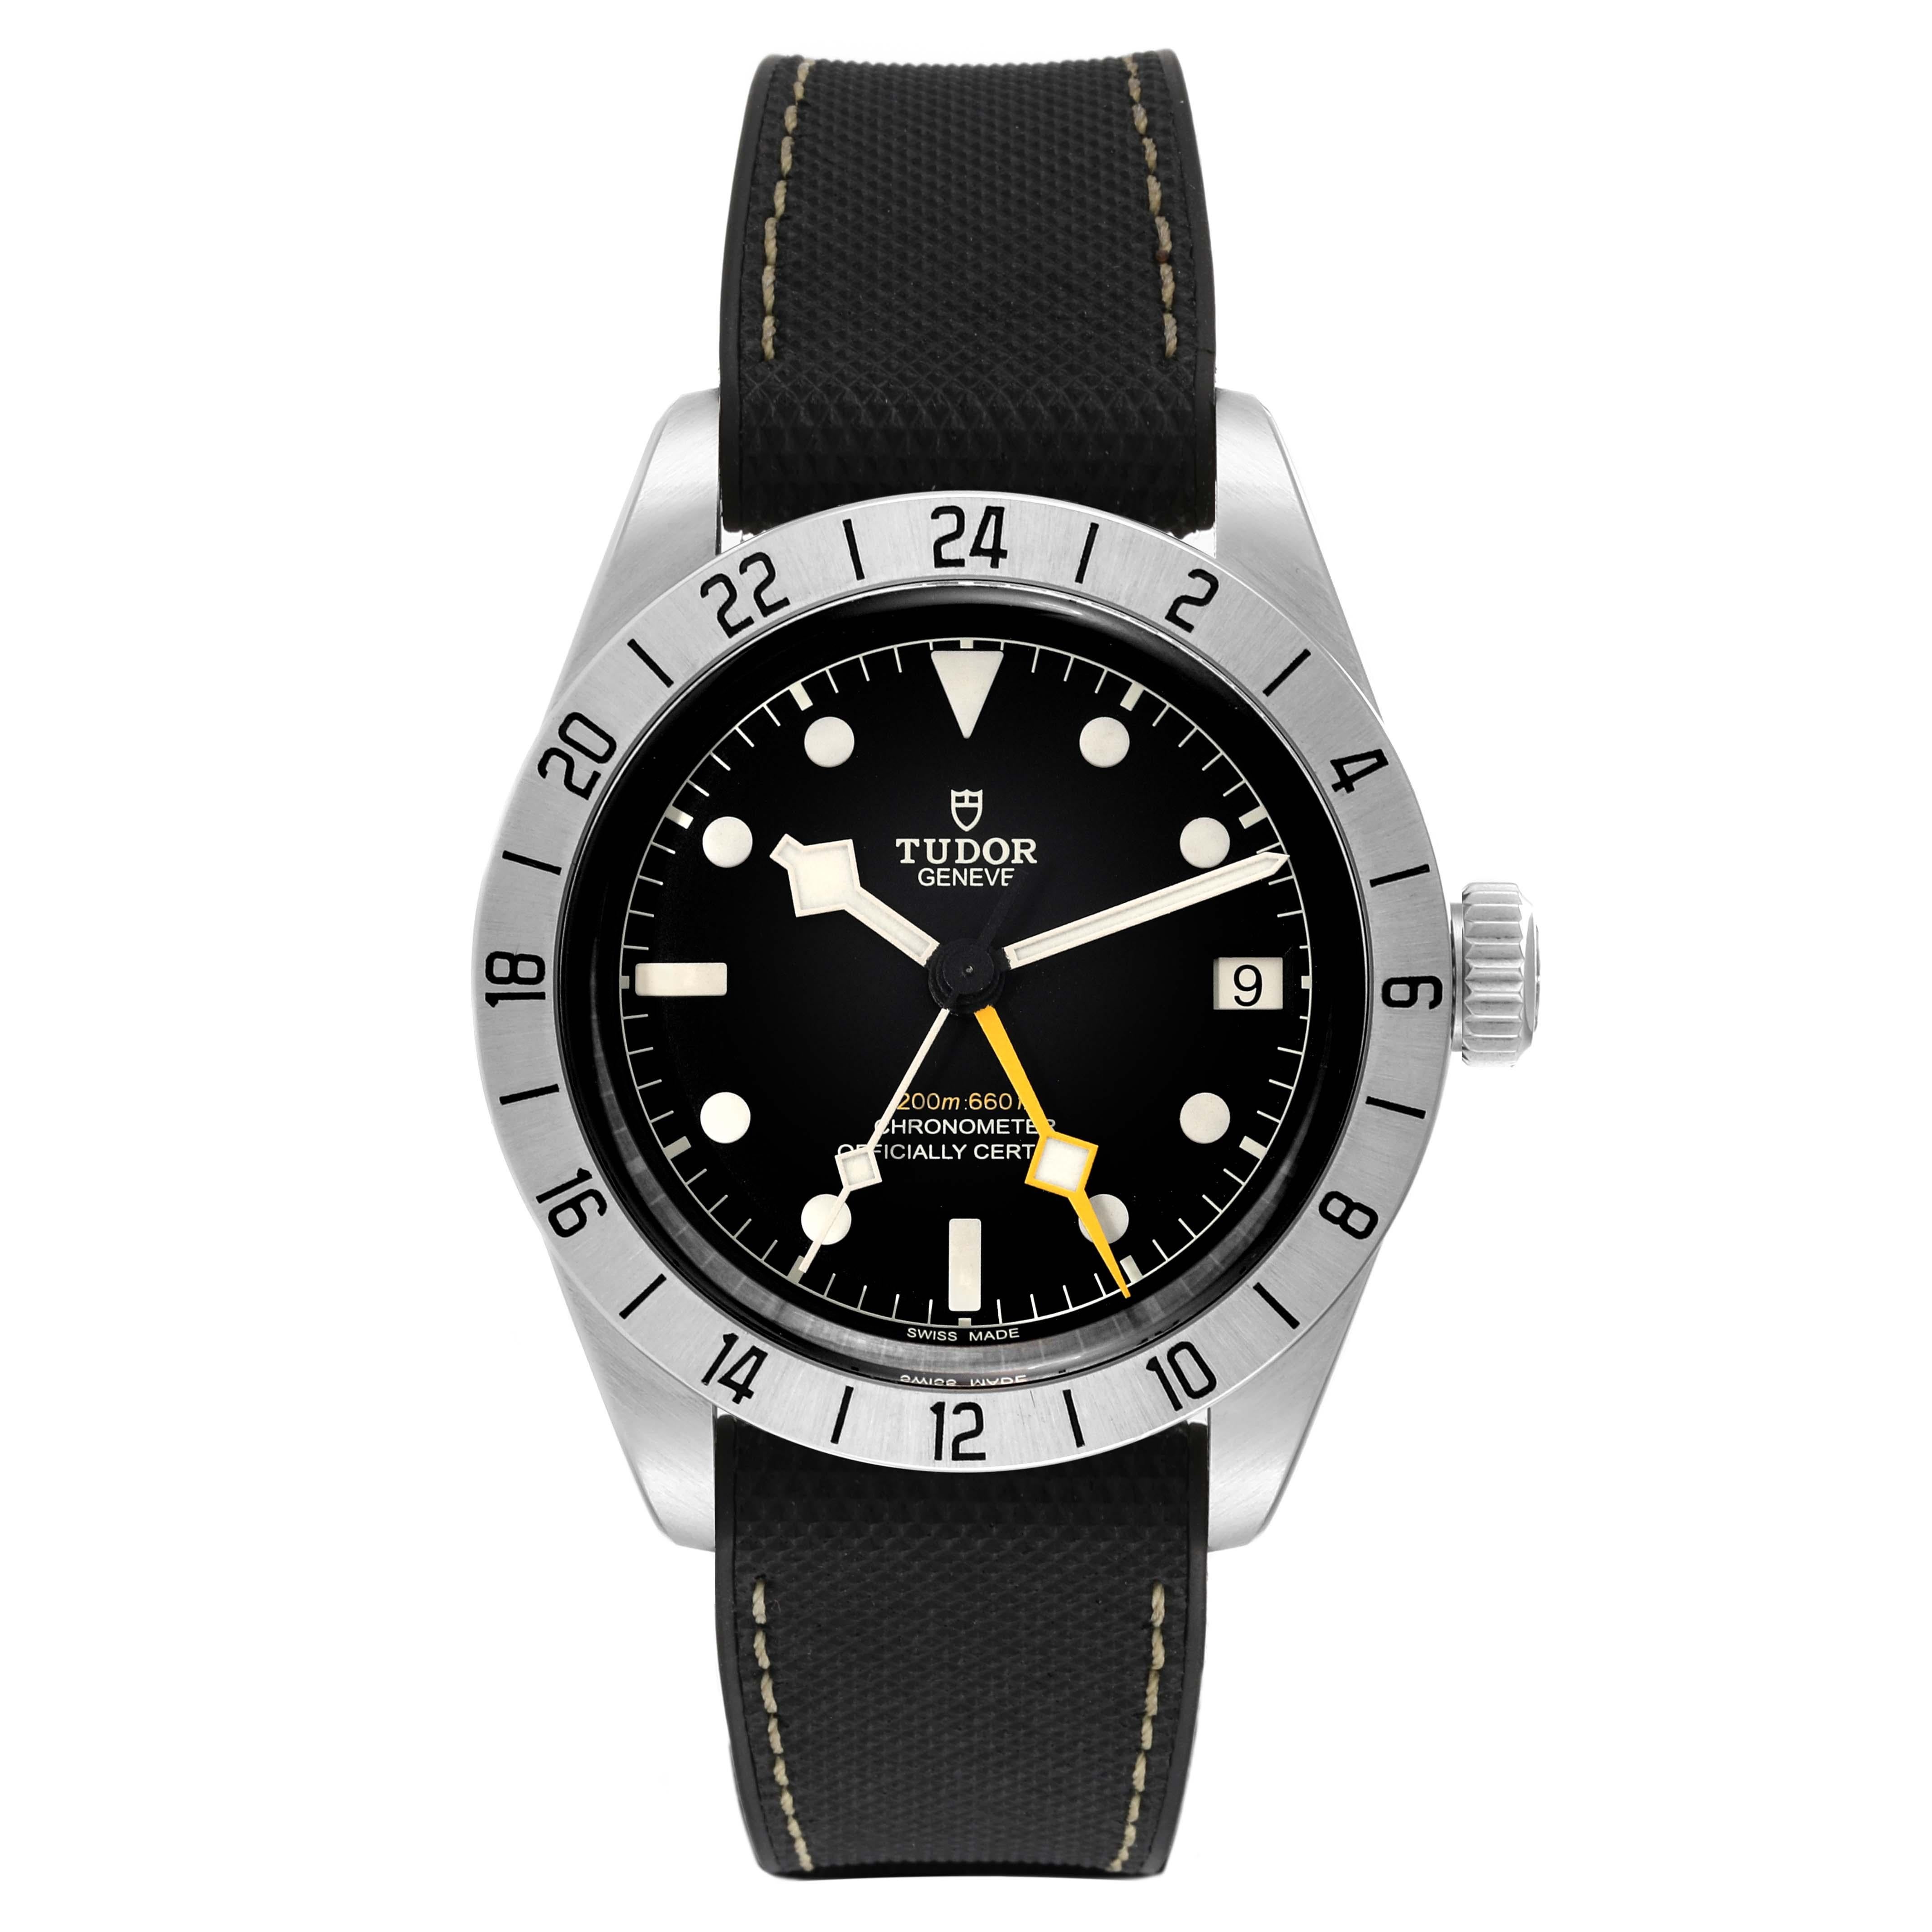 Tudor Black Bay Pro GMT Steel Mens Watch M79470 Box Card. Automatic self-winding movement. Stainless steel case 39.0 mm in diameter. Stainless steel 24 hour graduated bezel with satin finish. Scratch resistant sapphire crystal. Black dial with